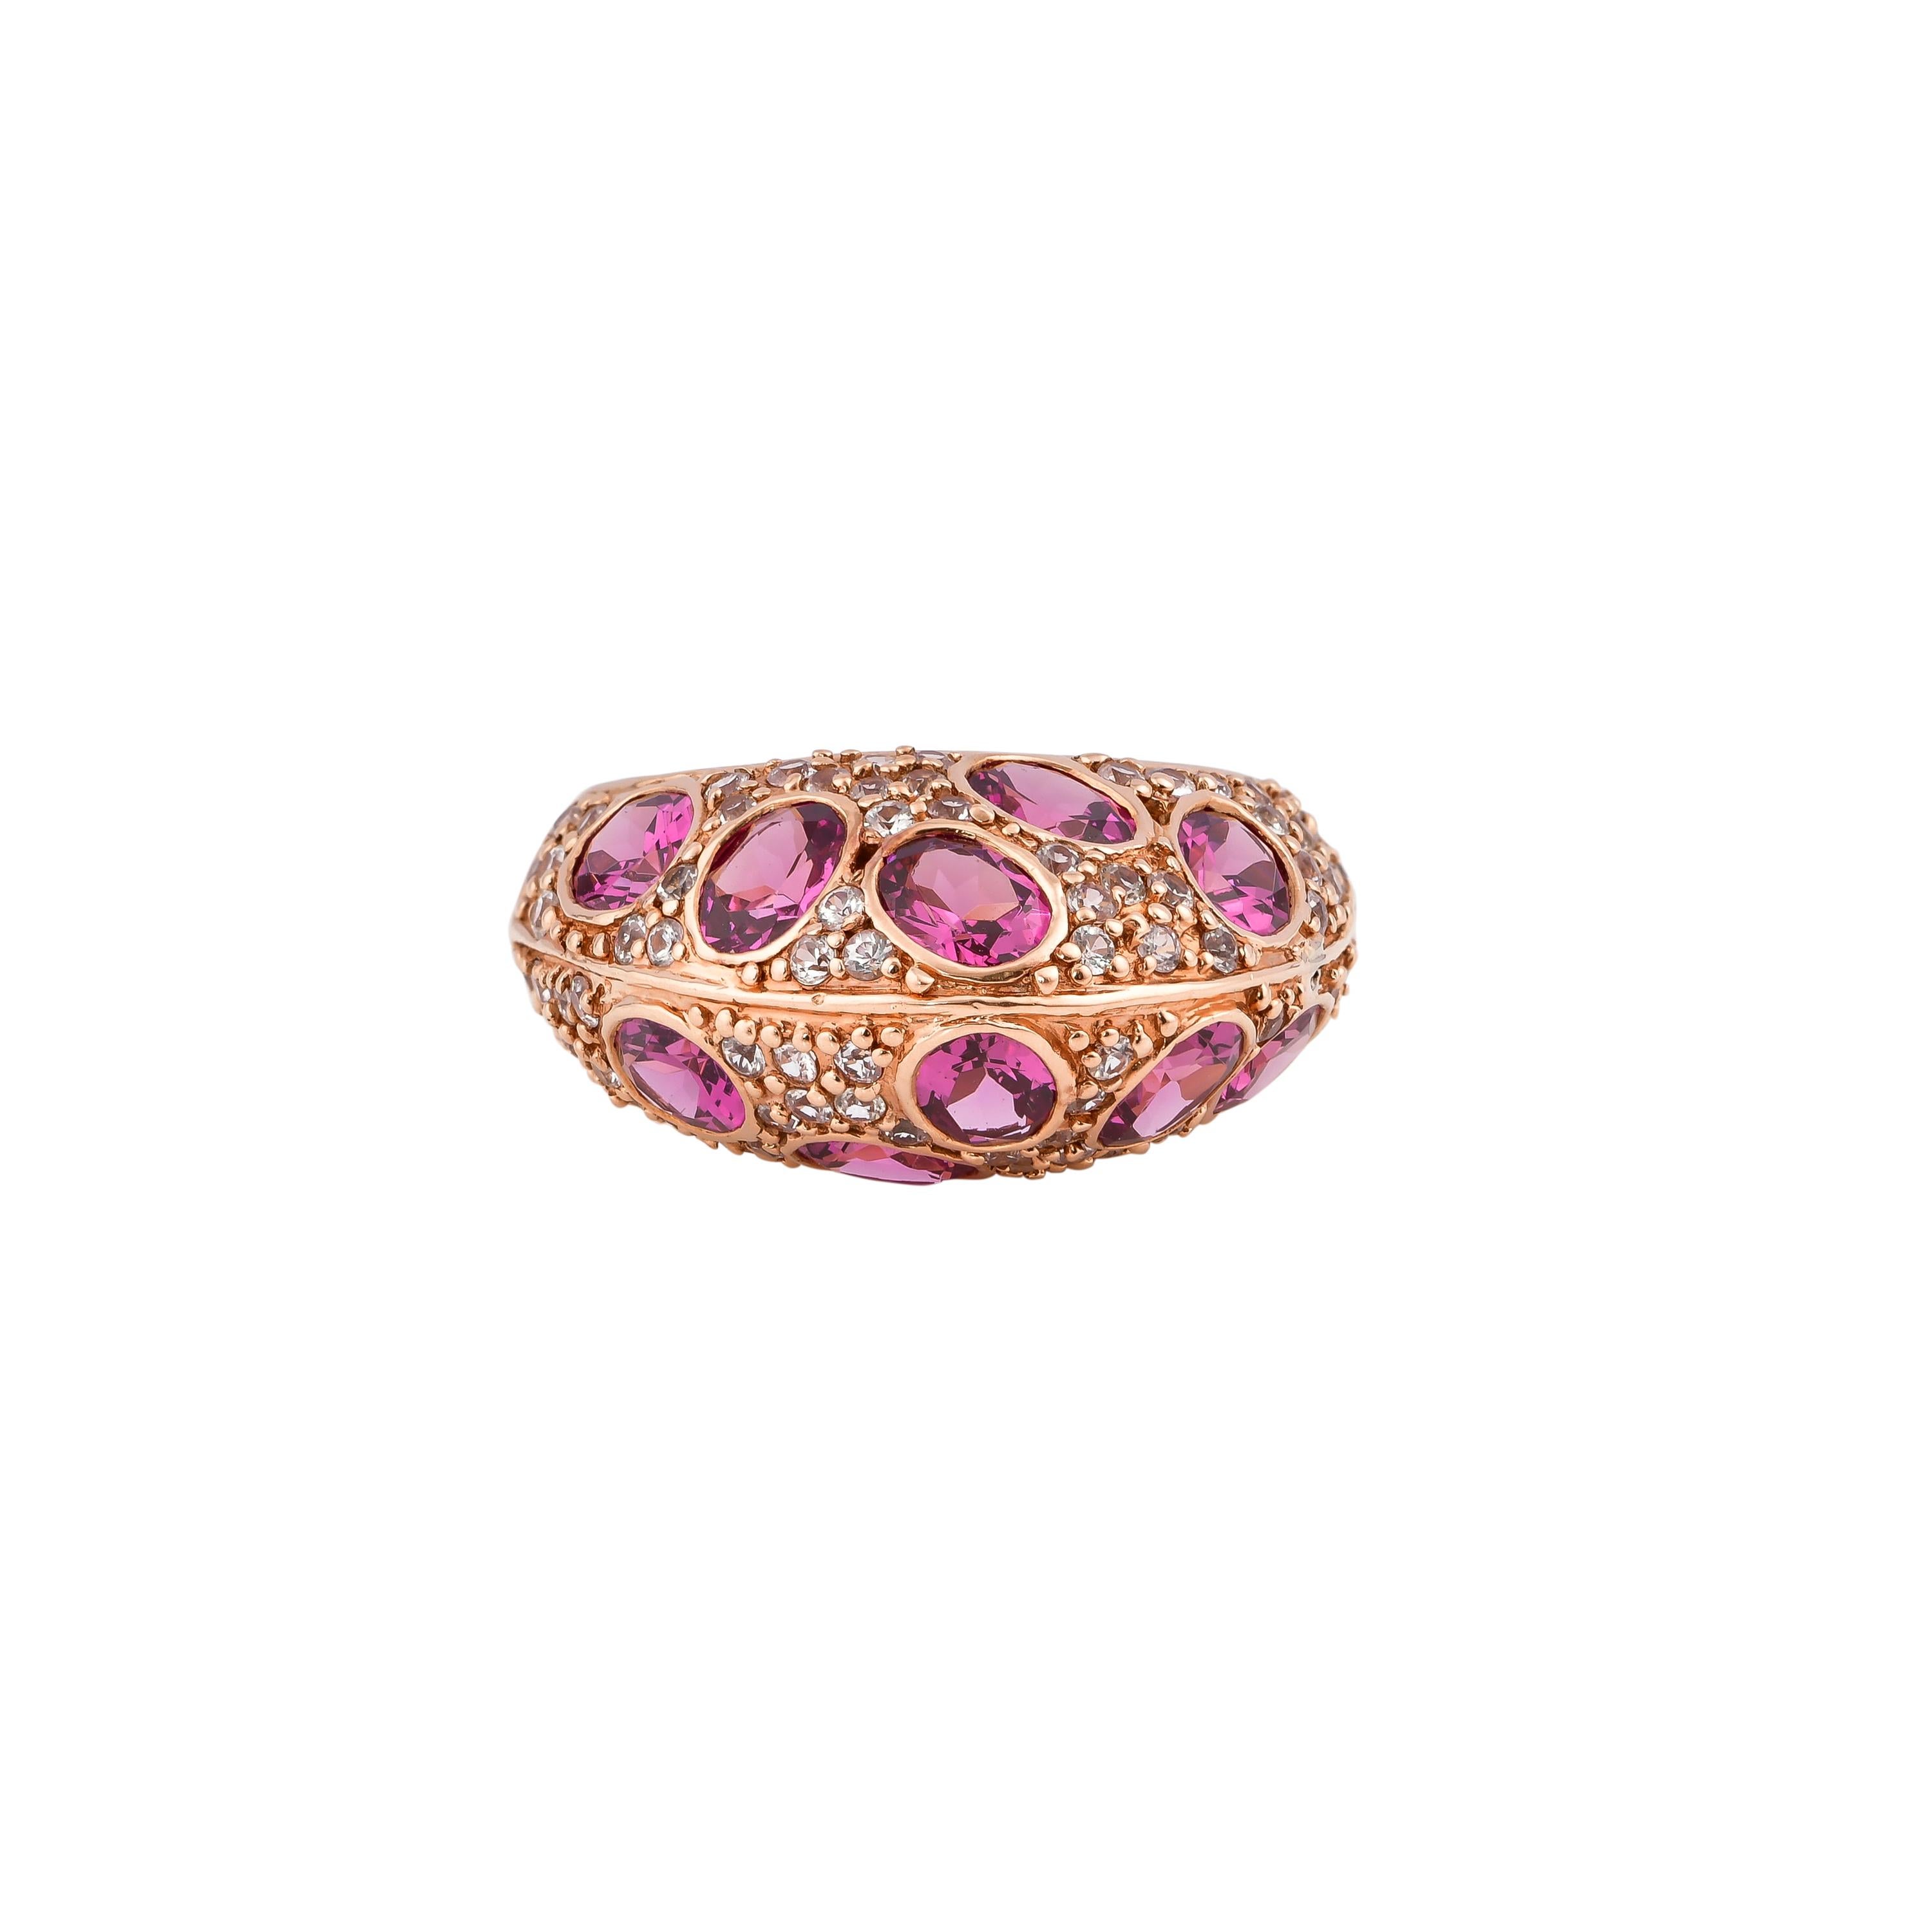 Contemporary 4.44 Carat Rhodolite and White Sapphire Ring in 14 Karat Rose Gold